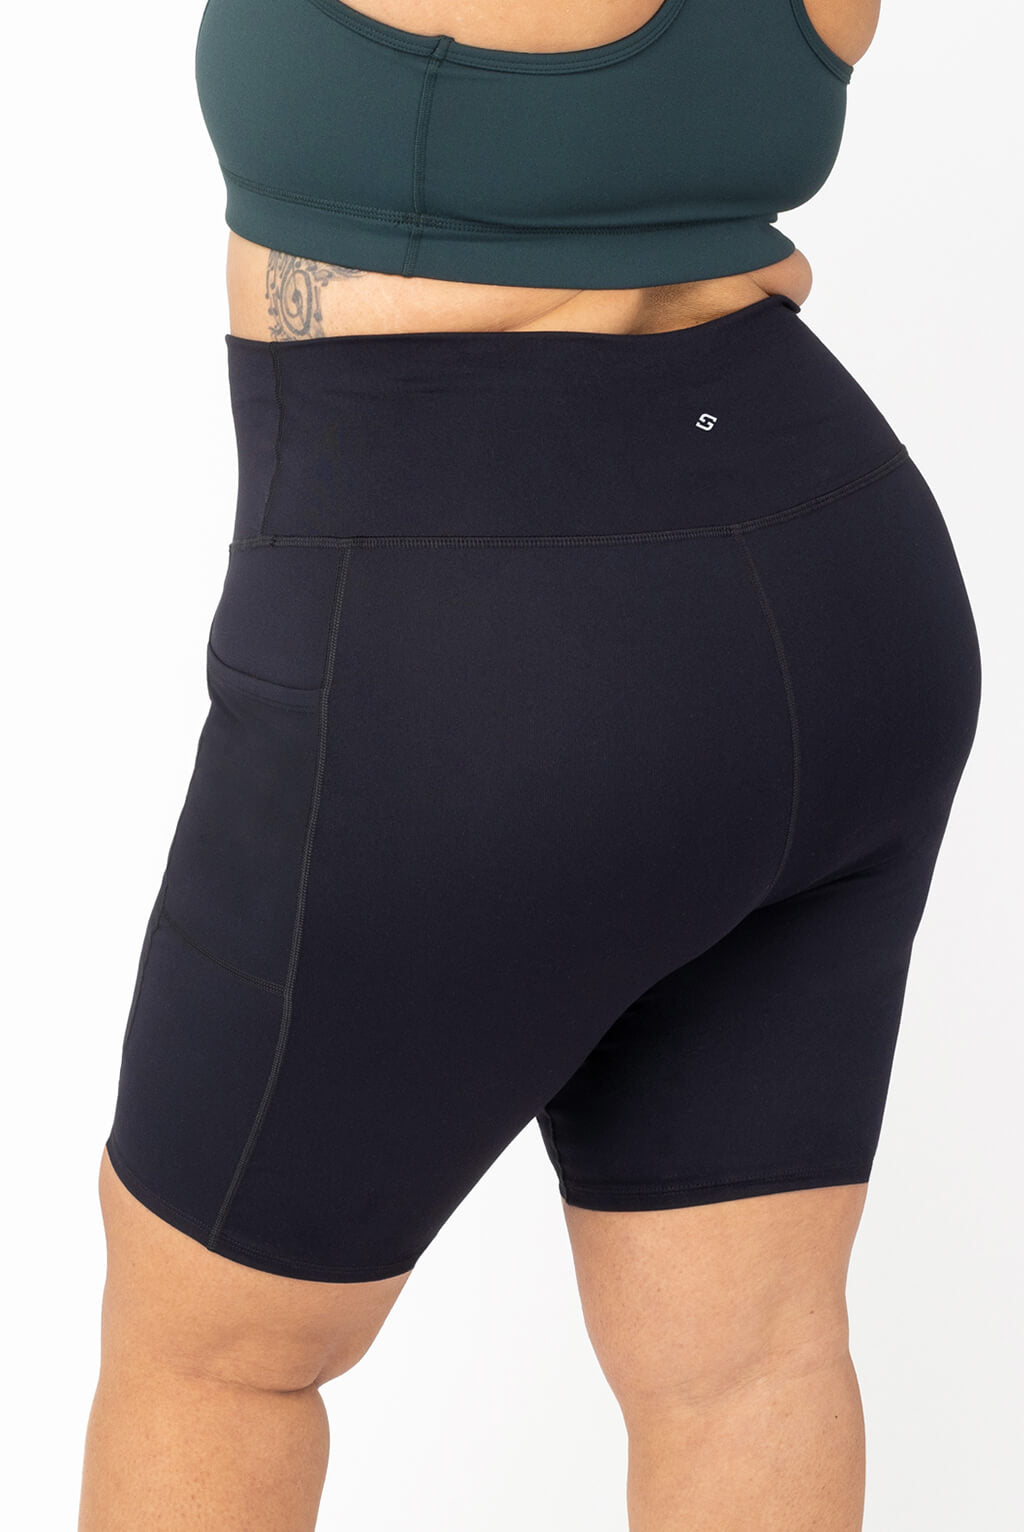 High Waisted Oh My Squat Cycling Shorts